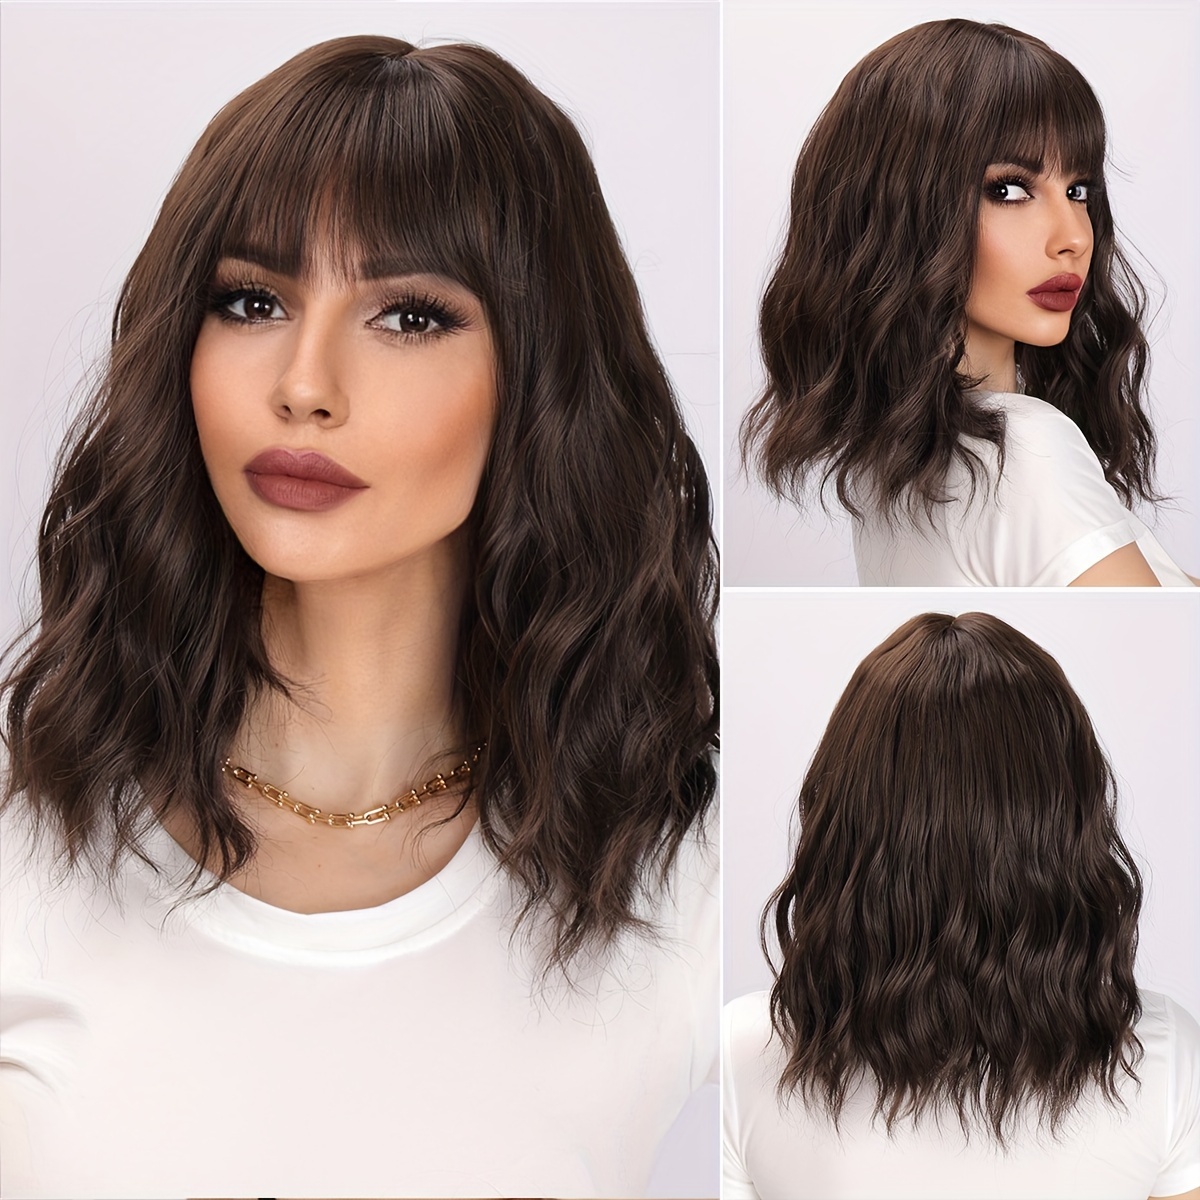 

Smilco 16 Inch Black Bangs Curly Synthetic Wig - Heat-resistant, Easy To Shape, Paired With A Comfortable Rose Mesh Hat To Create A Daily Look